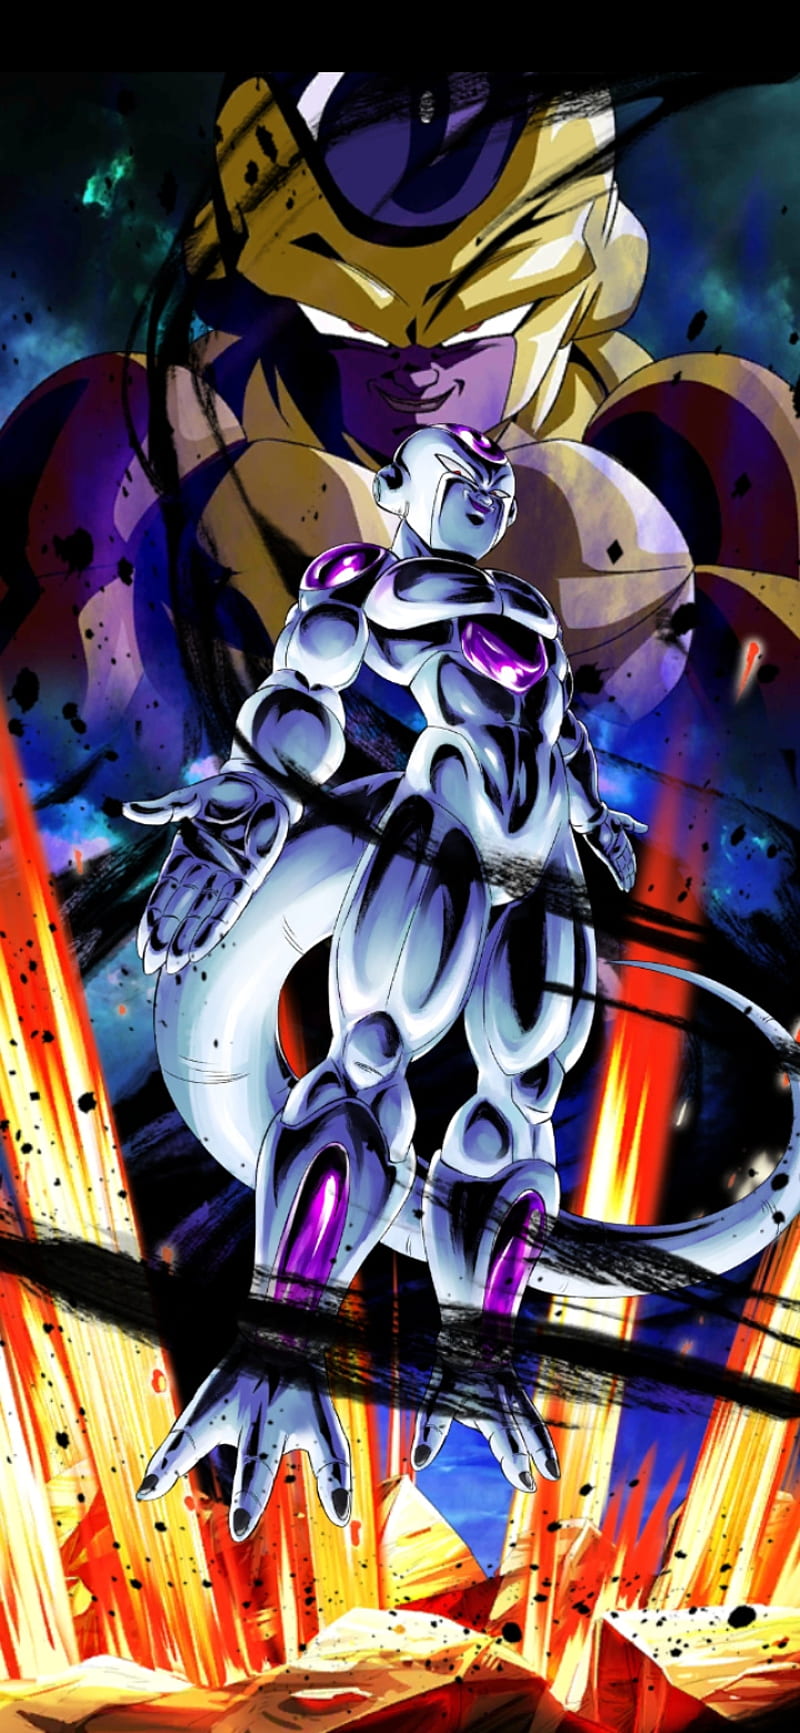 140 Frieza Dragon Ball HD Wallpapers and Backgrounds